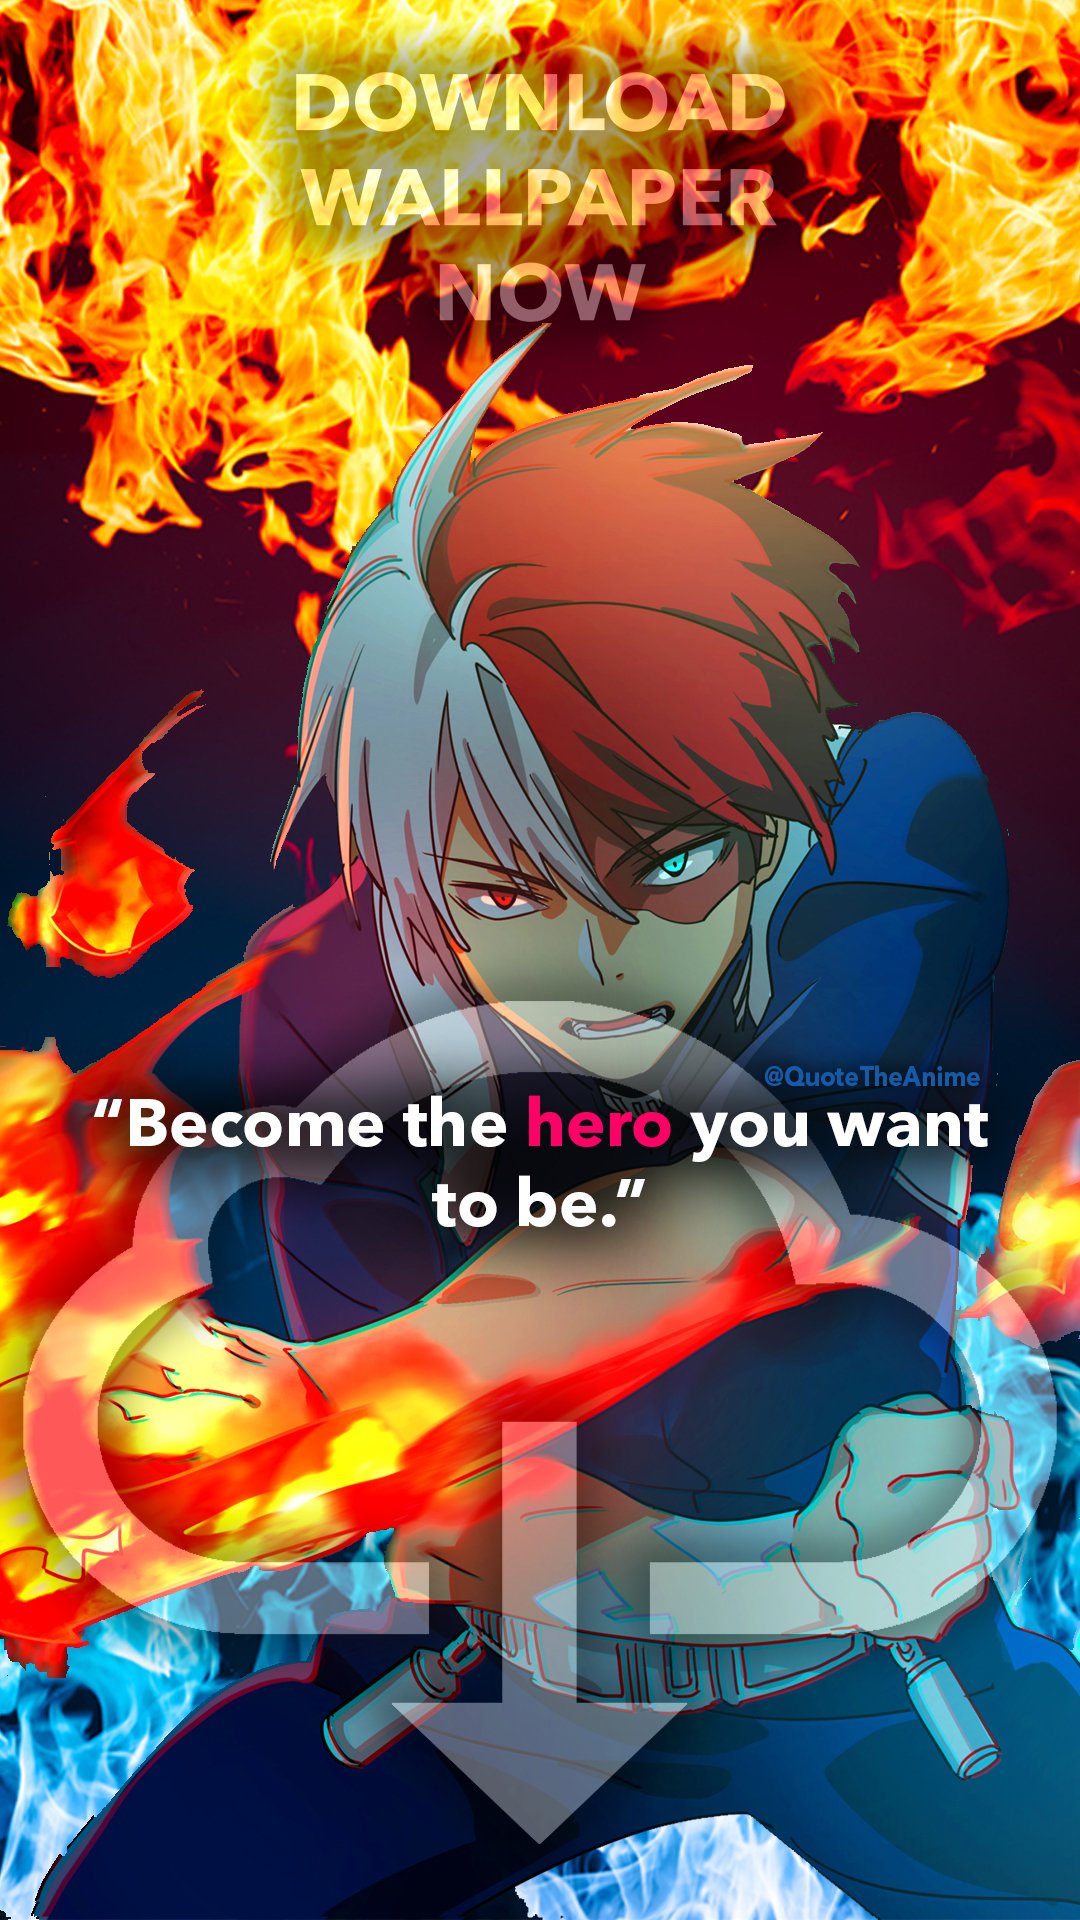 Quote The Anime Tododorki Wallpaper. Hero Academia Wallpaper. 'Become the hero you want to be.' Shoto Todoroki Quotes. My Hero Academia Quotes